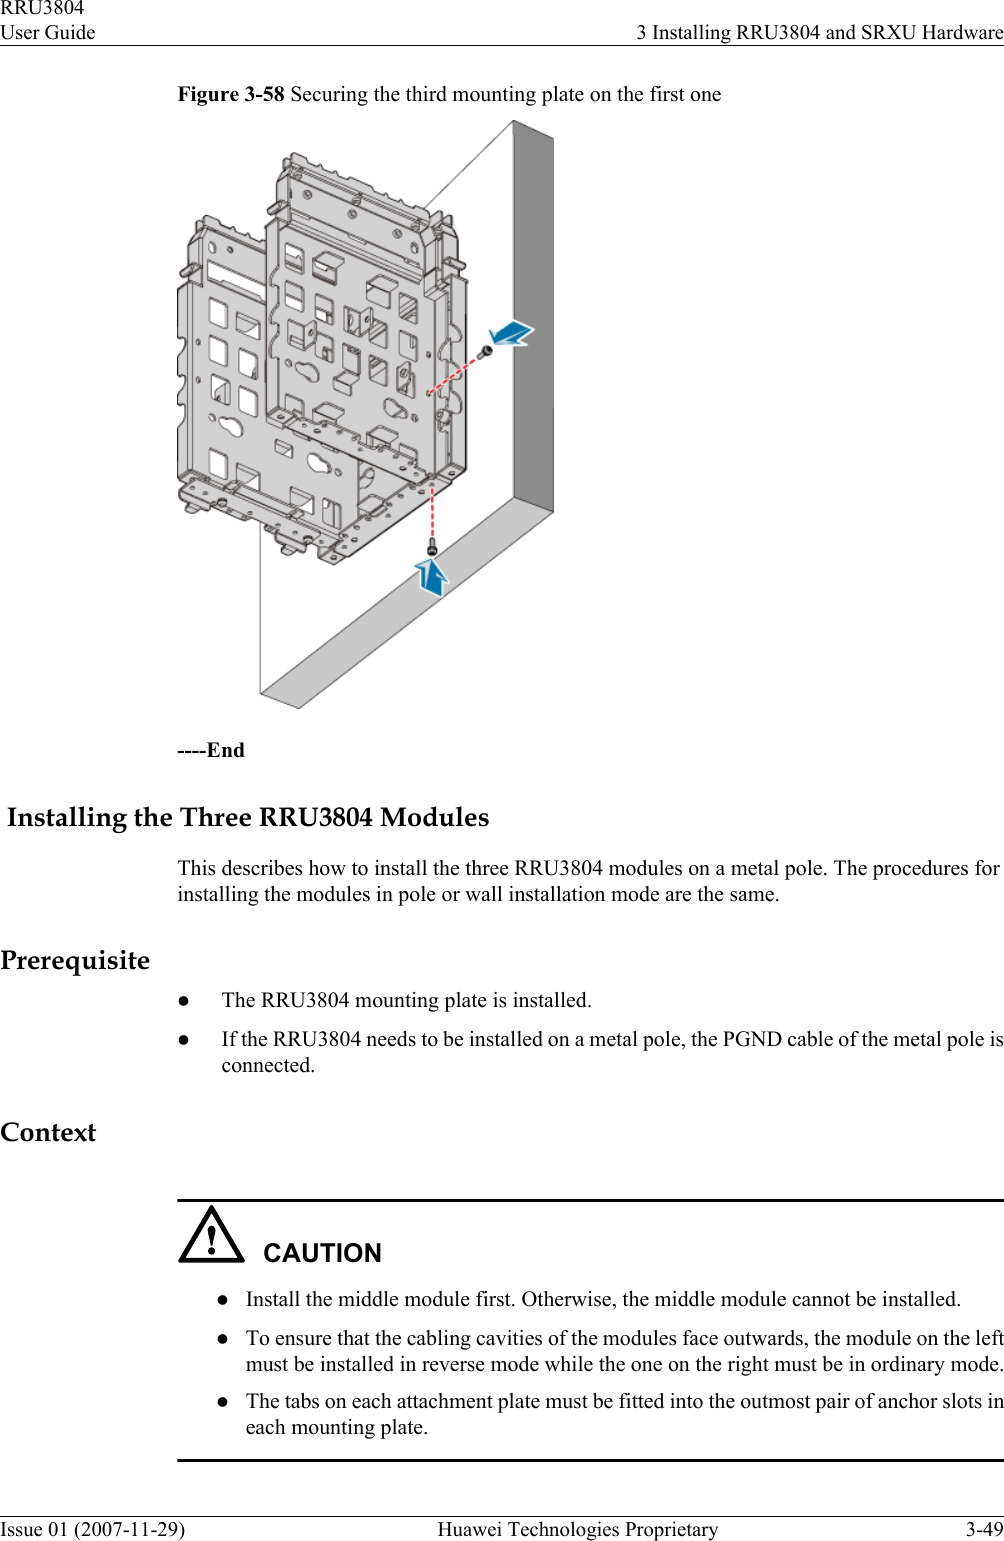 Figure 3-58 Securing the third mounting plate on the first one----End Installing the Three RRU3804 ModulesThis describes how to install the three RRU3804 modules on a metal pole. The procedures forinstalling the modules in pole or wall installation mode are the same.PrerequisitelThe RRU3804 mounting plate is installed.lIf the RRU3804 needs to be installed on a metal pole, the PGND cable of the metal pole isconnected.ContextCAUTIONlInstall the middle module first. Otherwise, the middle module cannot be installed.lTo ensure that the cabling cavities of the modules face outwards, the module on the leftmust be installed in reverse mode while the one on the right must be in ordinary mode.lThe tabs on each attachment plate must be fitted into the outmost pair of anchor slots ineach mounting plate.RRU3804User Guide 3 Installing RRU3804 and SRXU HardwareIssue 01 (2007-11-29)  Huawei Technologies Proprietary 3-49